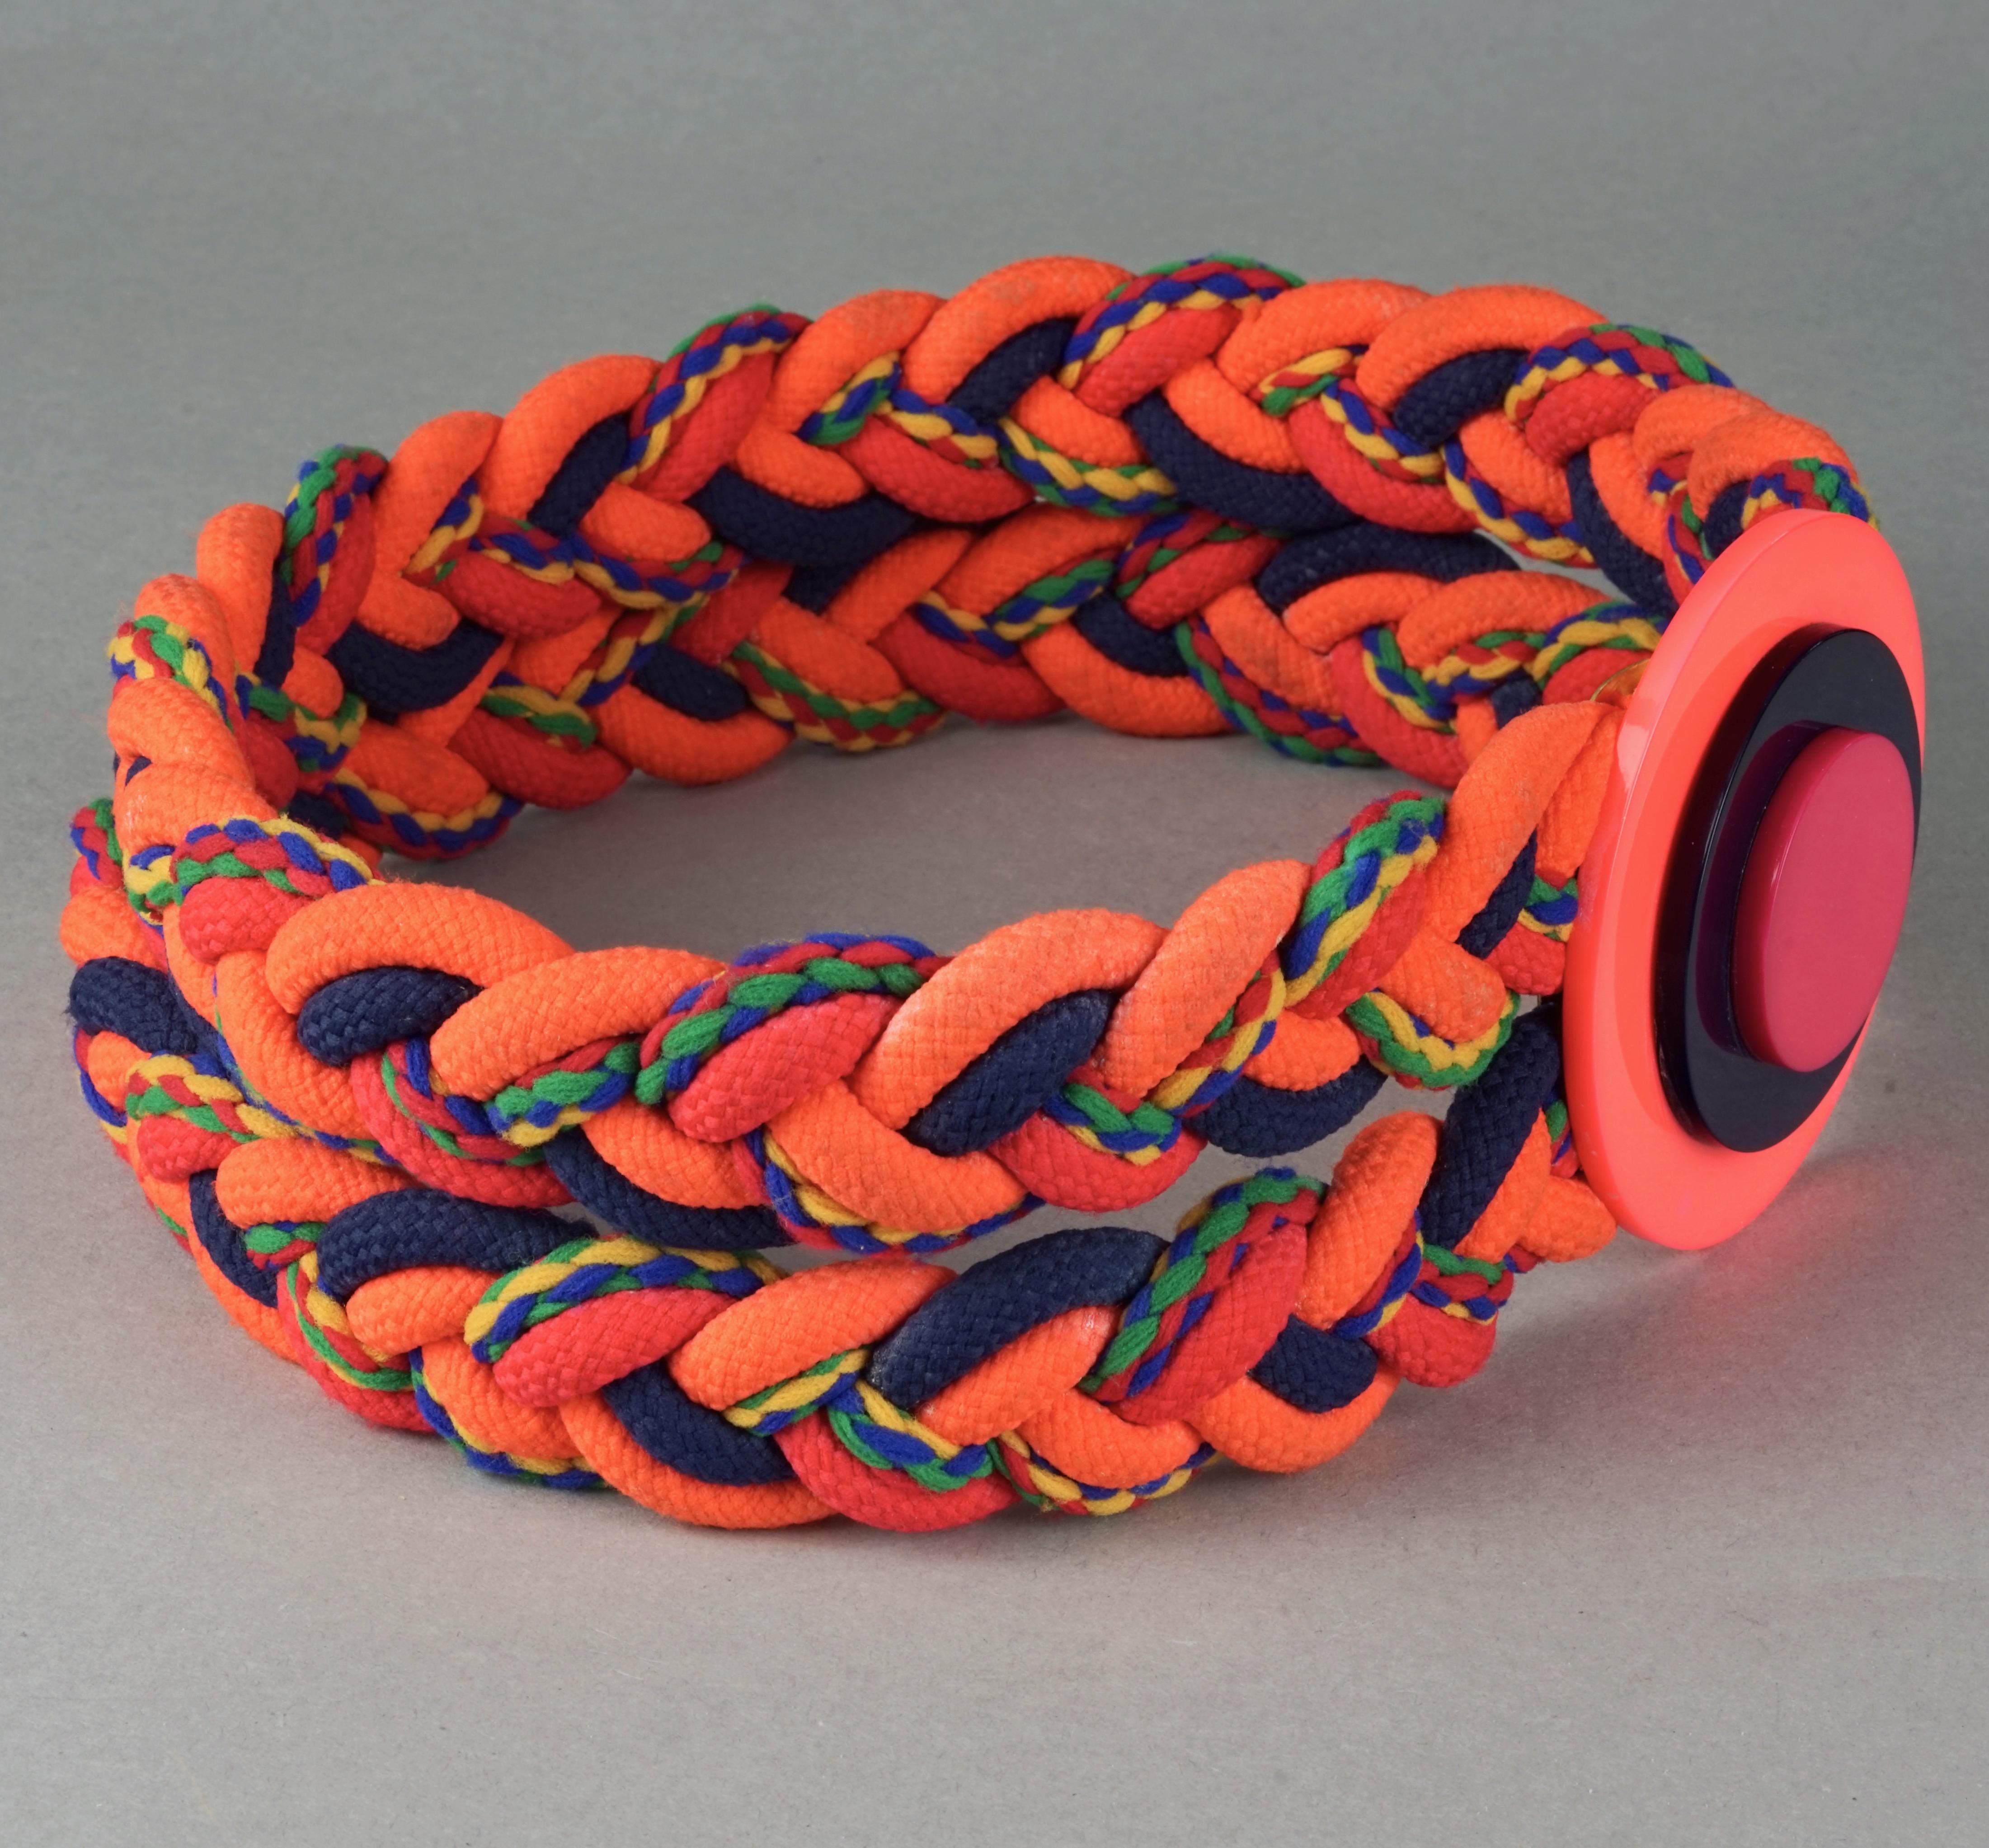 Vintage YVES SAINT LAURENT Ysl Neon Space Age Woven Passementerie Belt In Good Condition For Sale In Kingersheim, Alsace